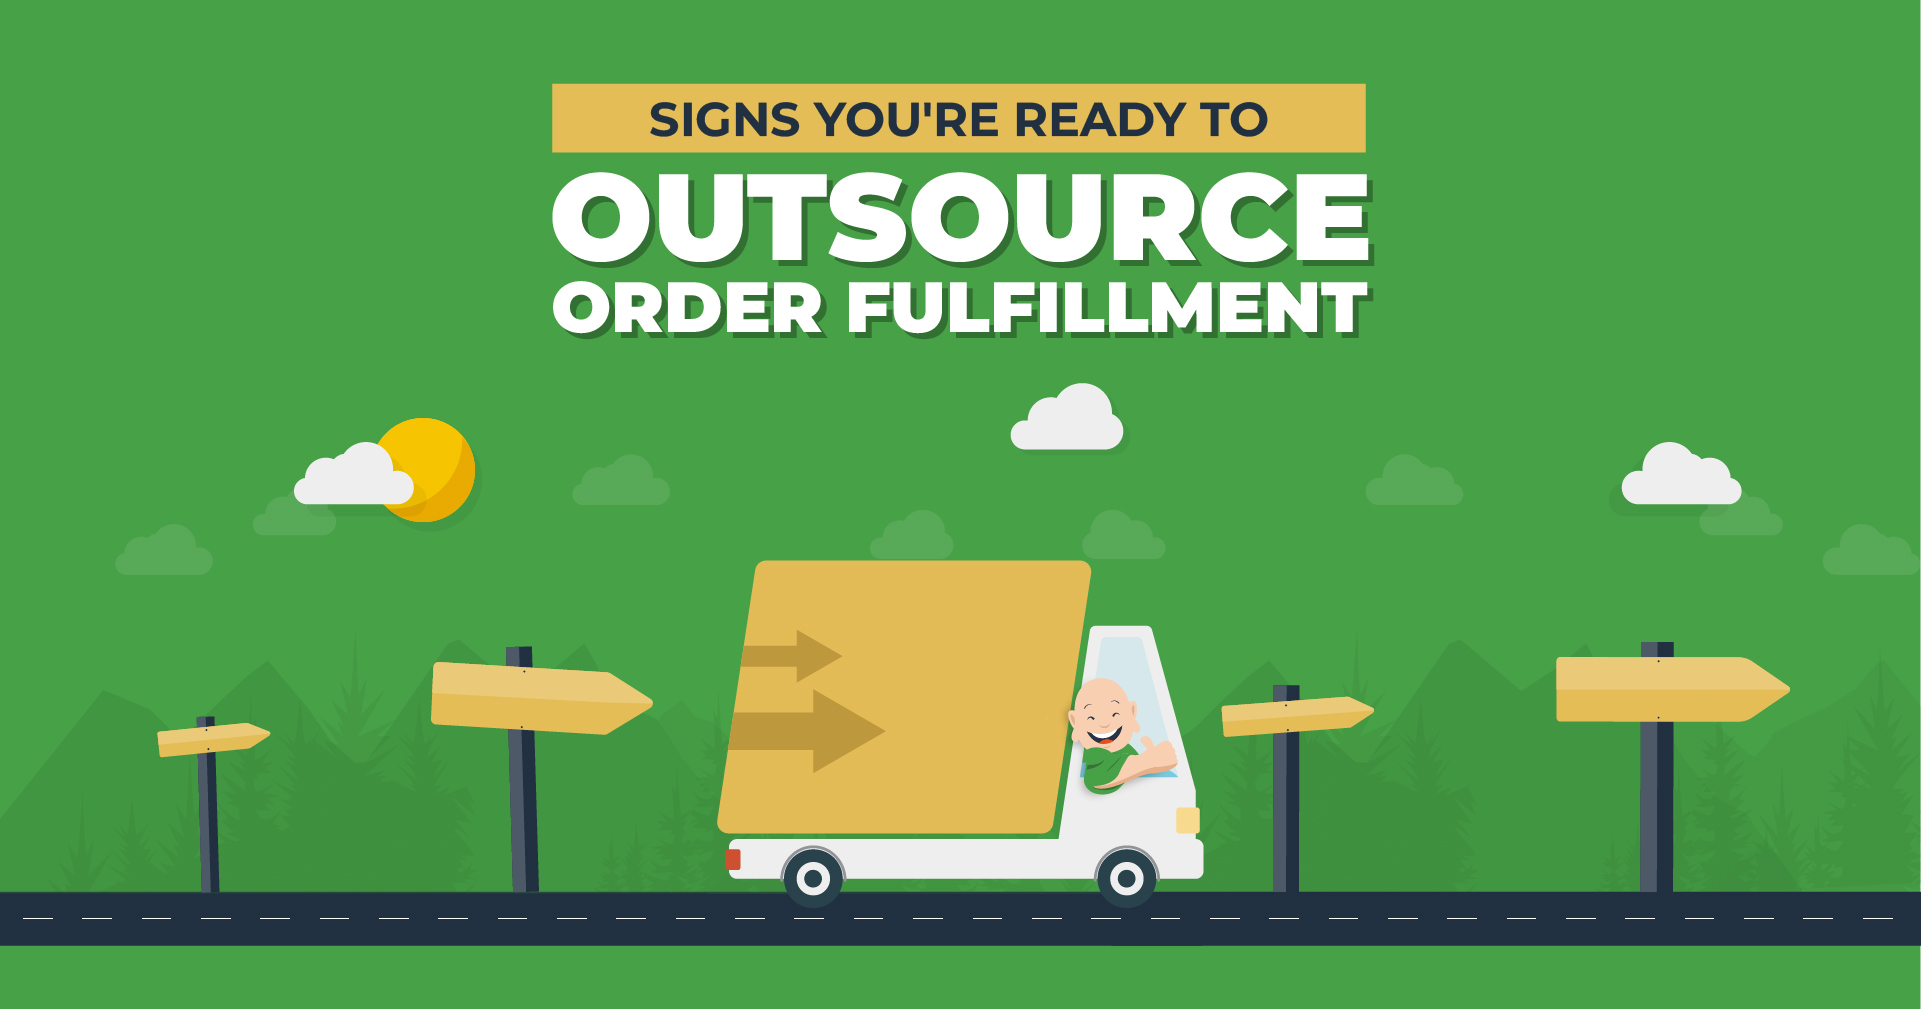 Signs You're Ready to Outsource Order Fulfillment